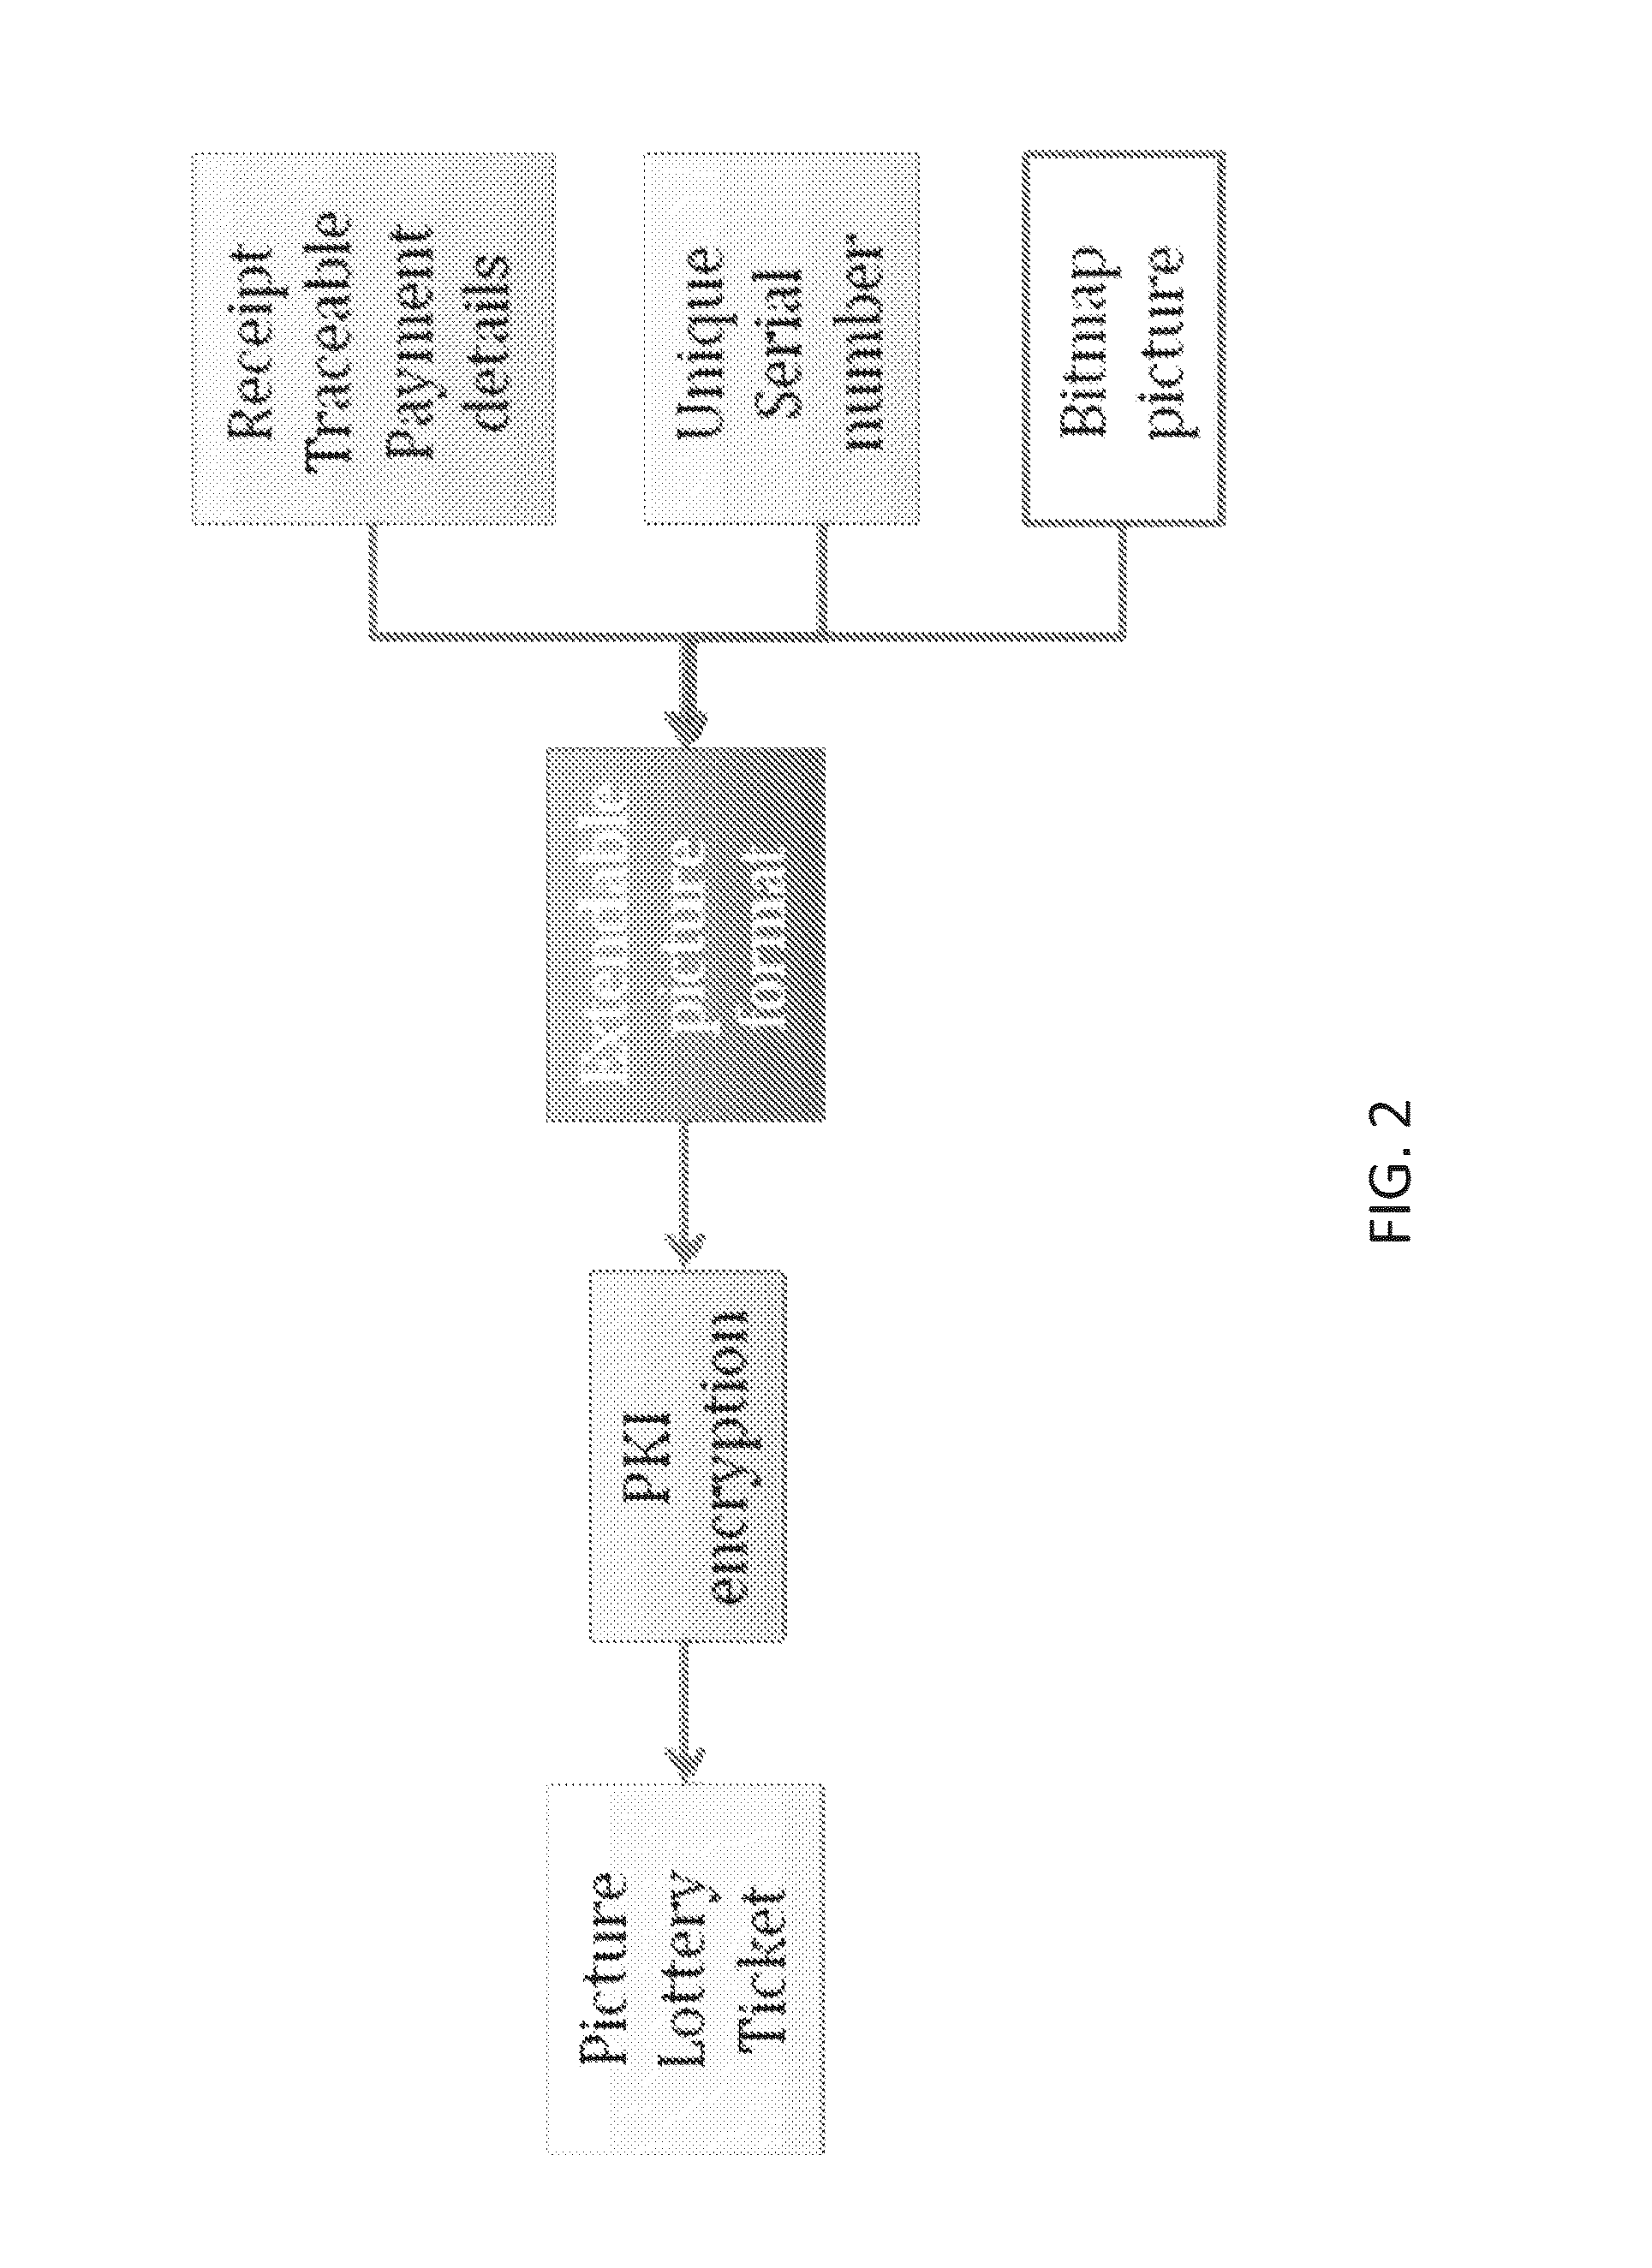 Games, lotteries, and sweepstakes and tickets, systems, technologies, and methods related thereto